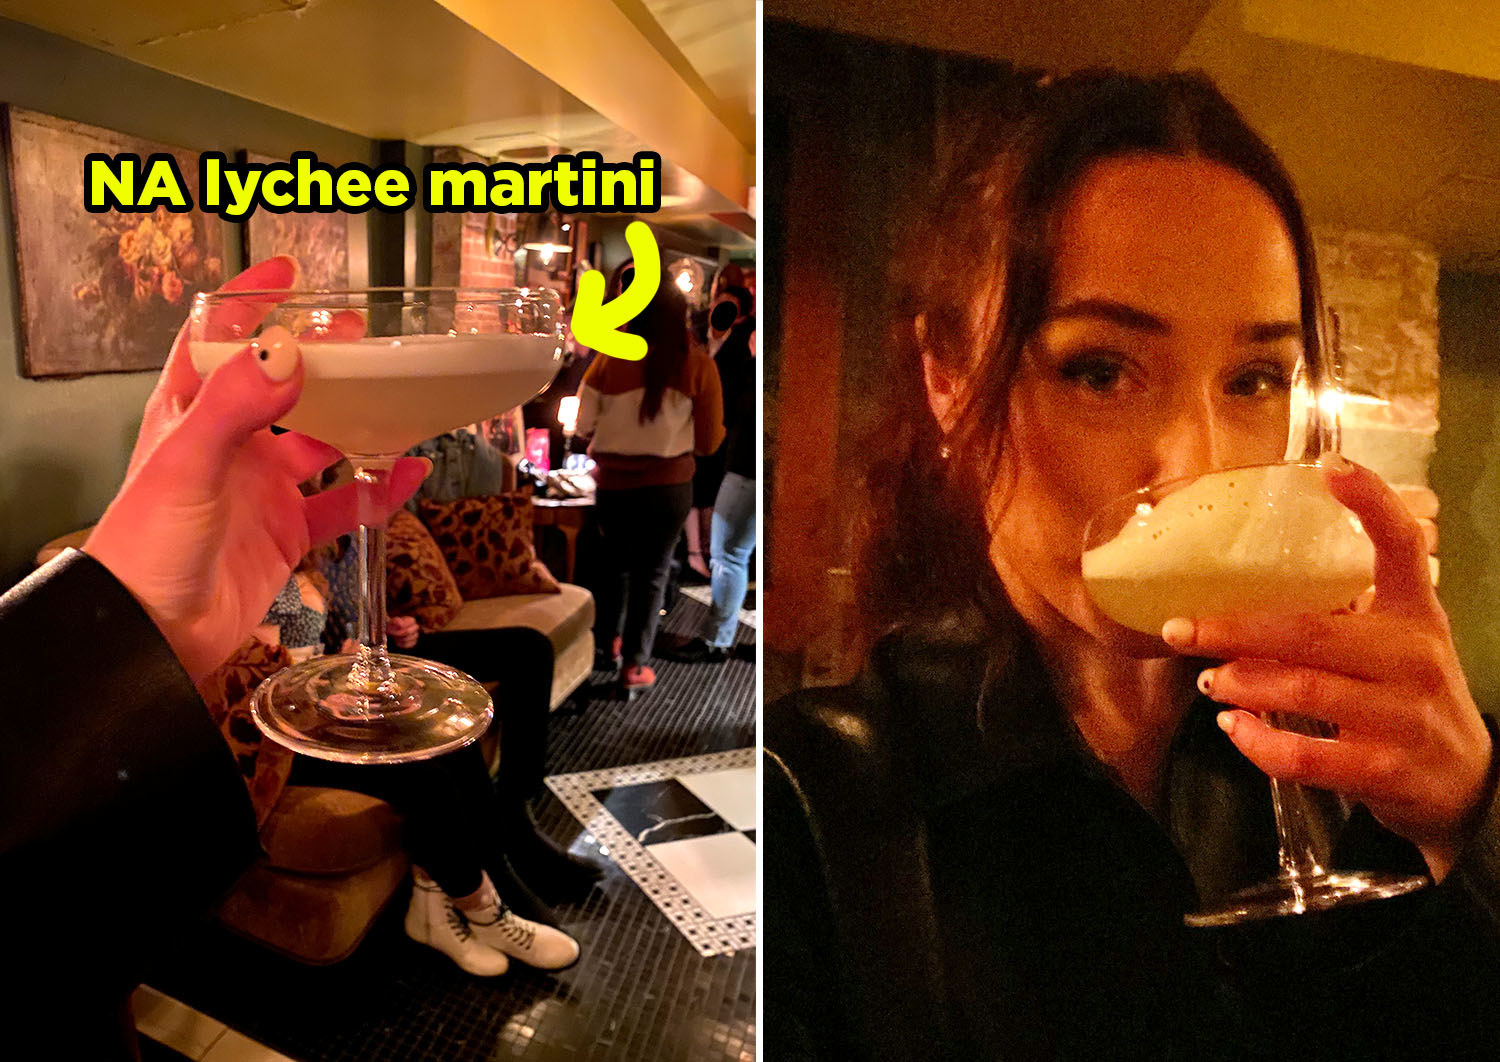 A hand holding the NA lychee martini, and a person drinking it